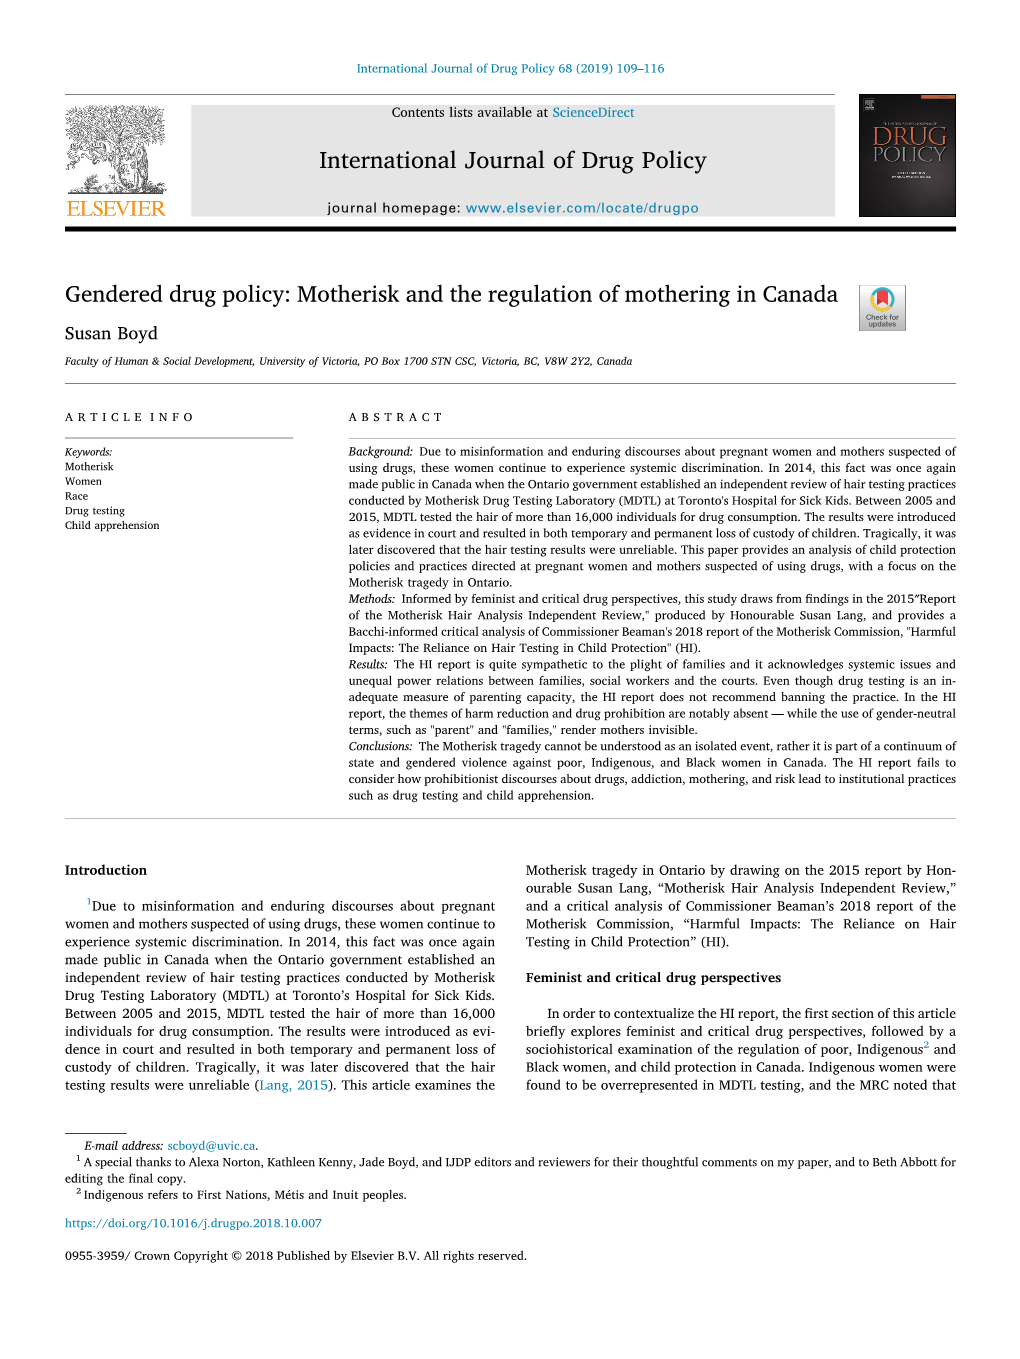 Gendered Drug Policy Motherisk and the Regulation of Mothering in Canada